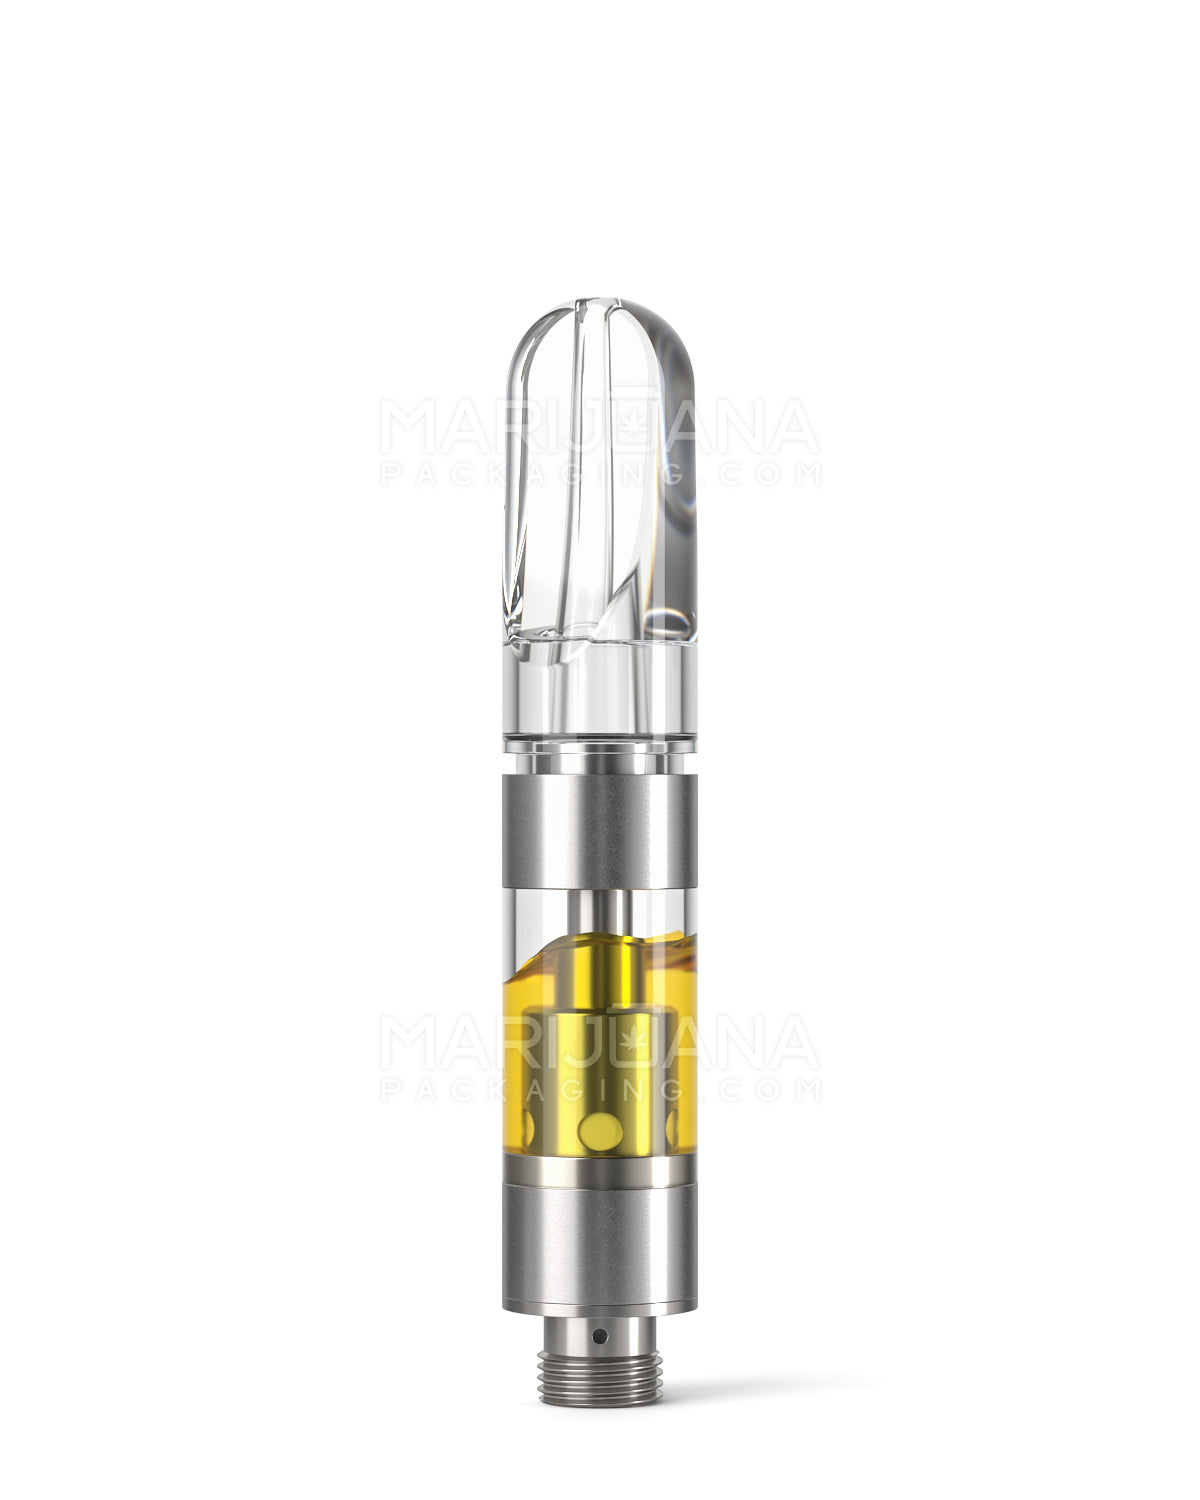 CCELL | Liquid6 Reactor Plastic Vape Cartridge with Clear Plastic Mouthpiece | 0.5mL - Press On - 100 Count - 2